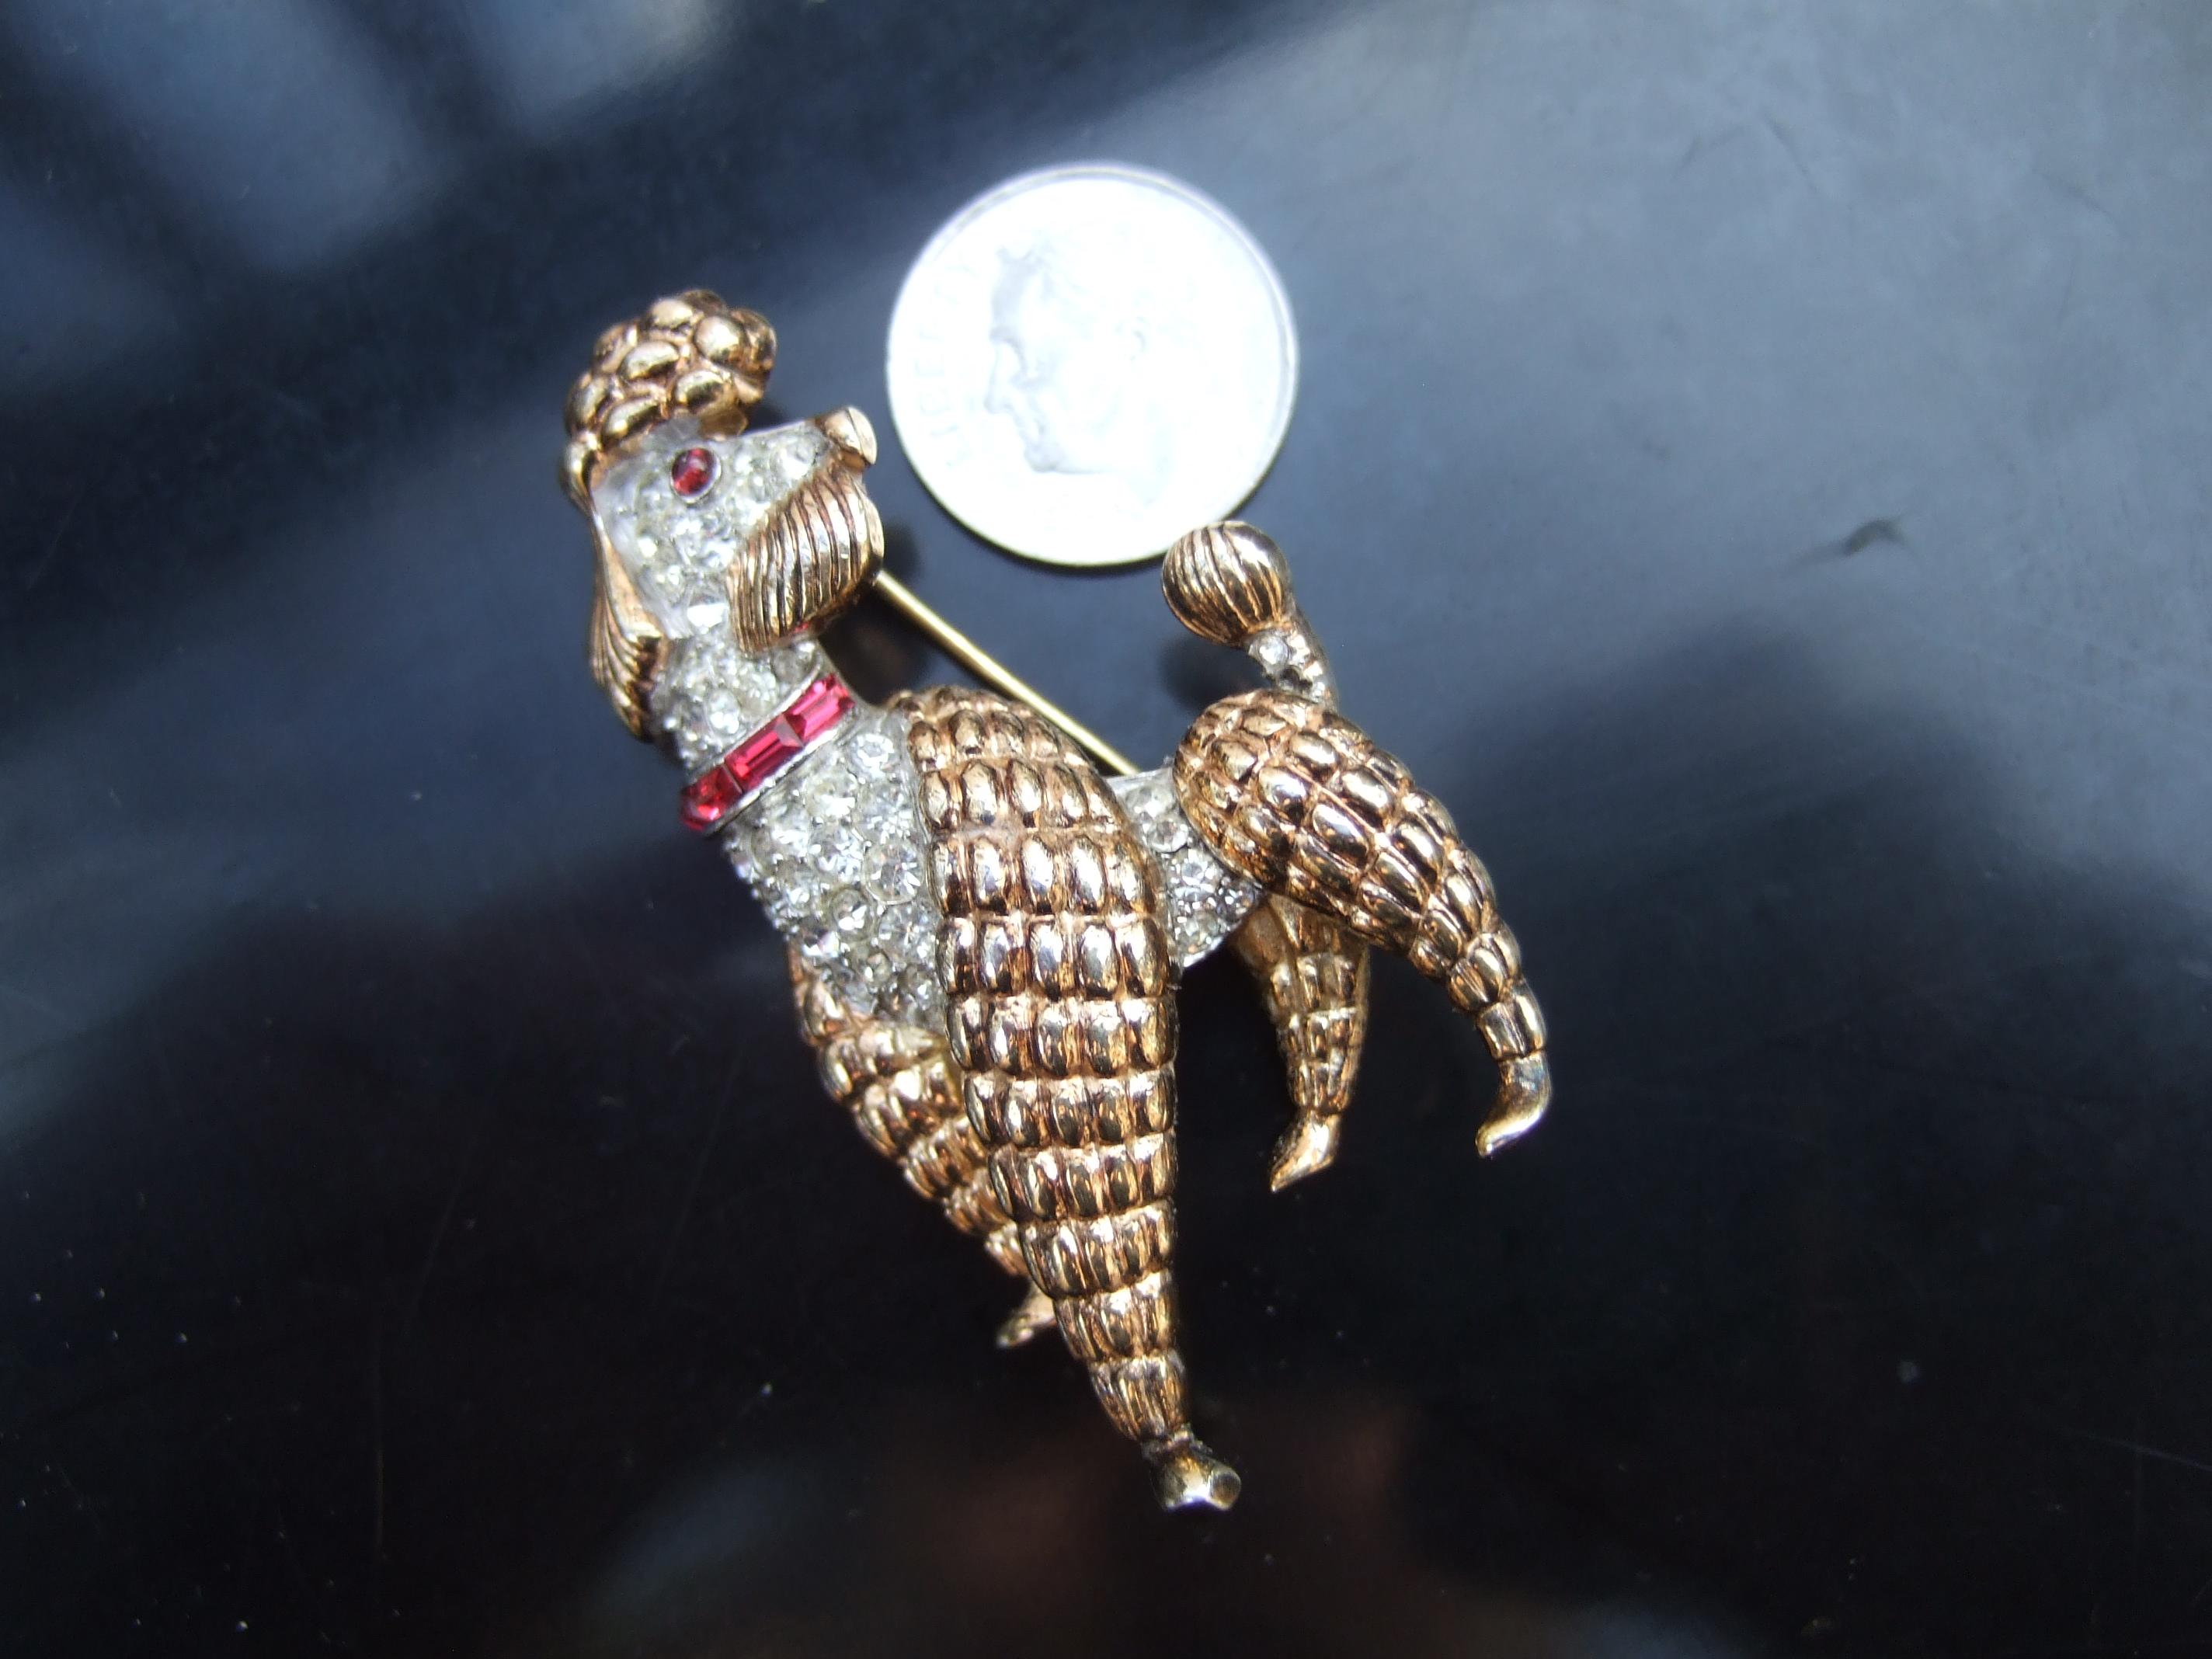 Trifari Gilt Metal Crystal Encrusted Poodle Dog Brooch c 1960 In Good Condition For Sale In University City, MO